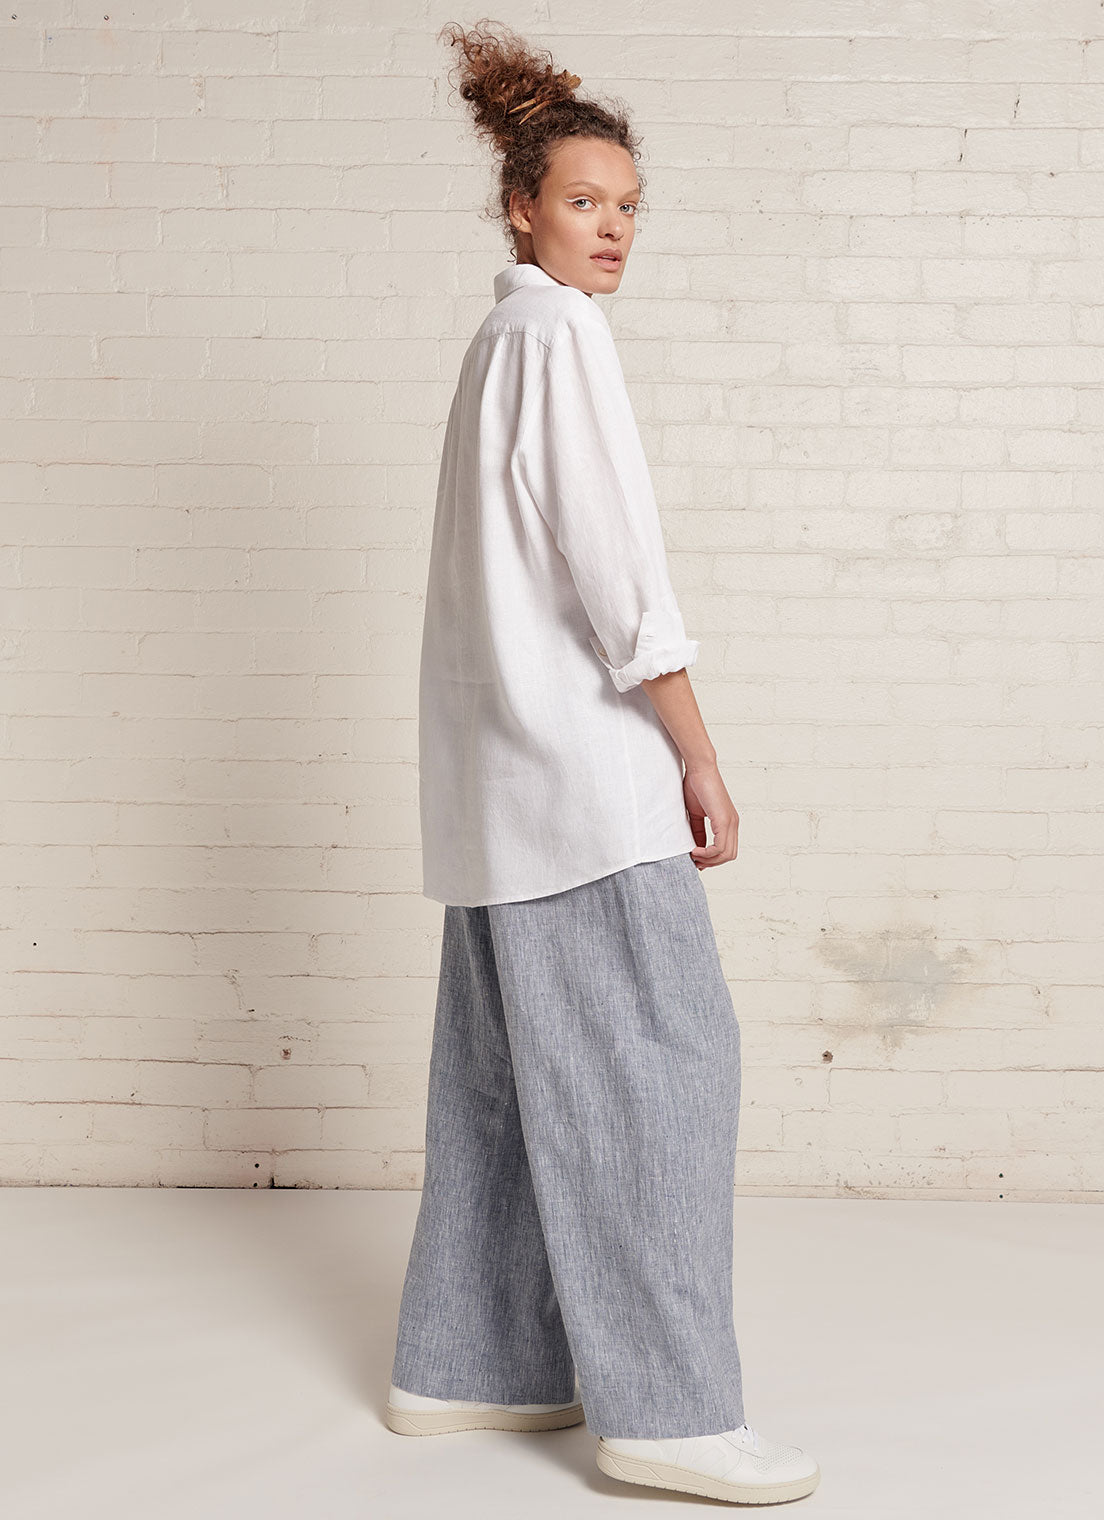 A denim, wide-leg pants with wide and elasticated back waistband and side pockets in yarn dye washed linen